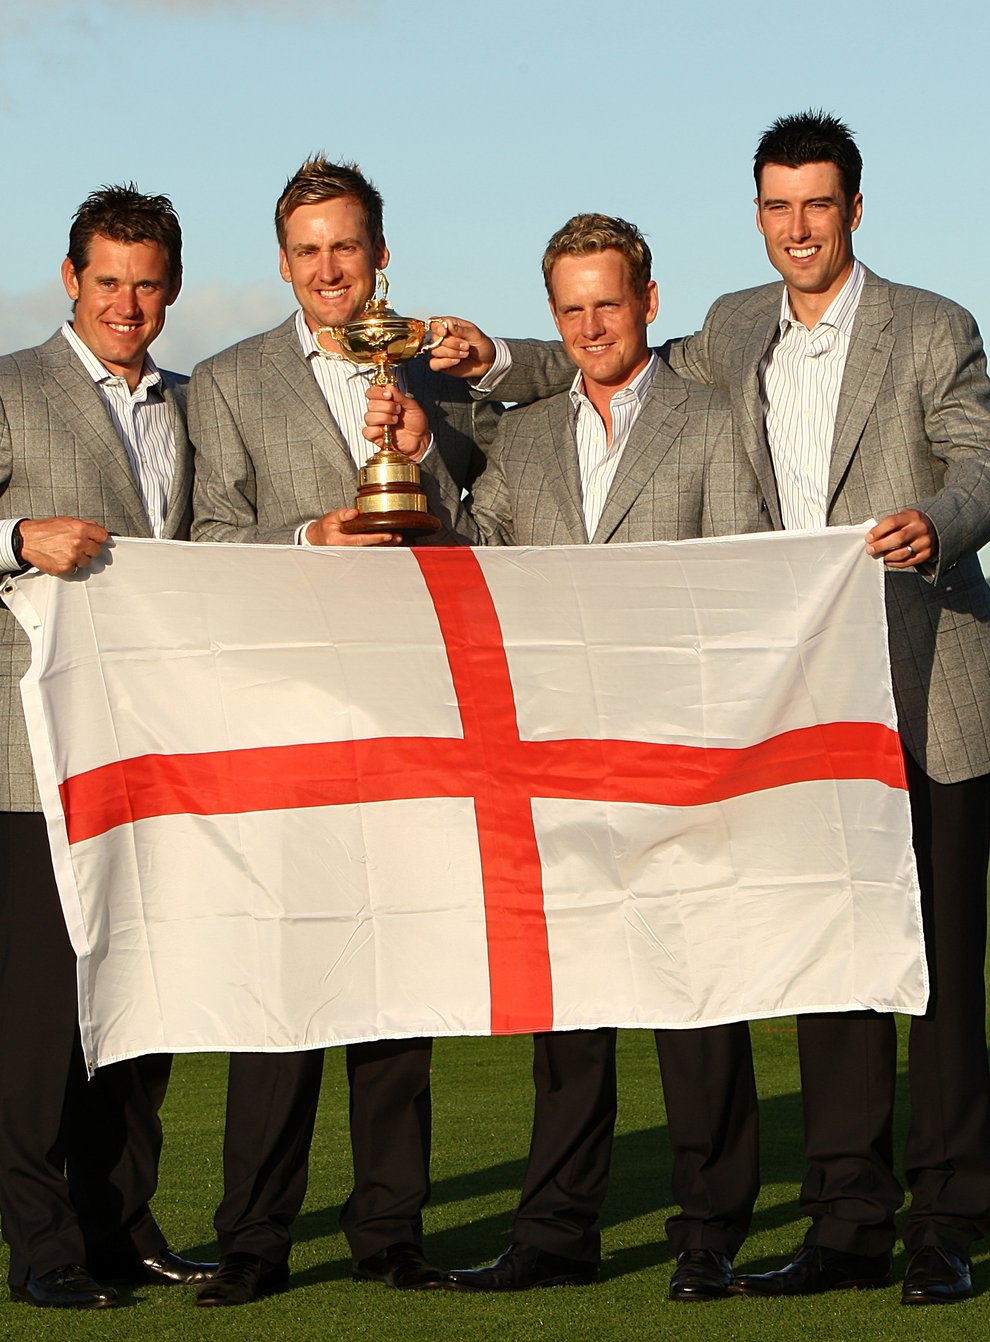 Luke Donald (second from right) has been named Europe’s Ryder Cup captain for next year’s contest in Rome (Lynne Cameron/PA)